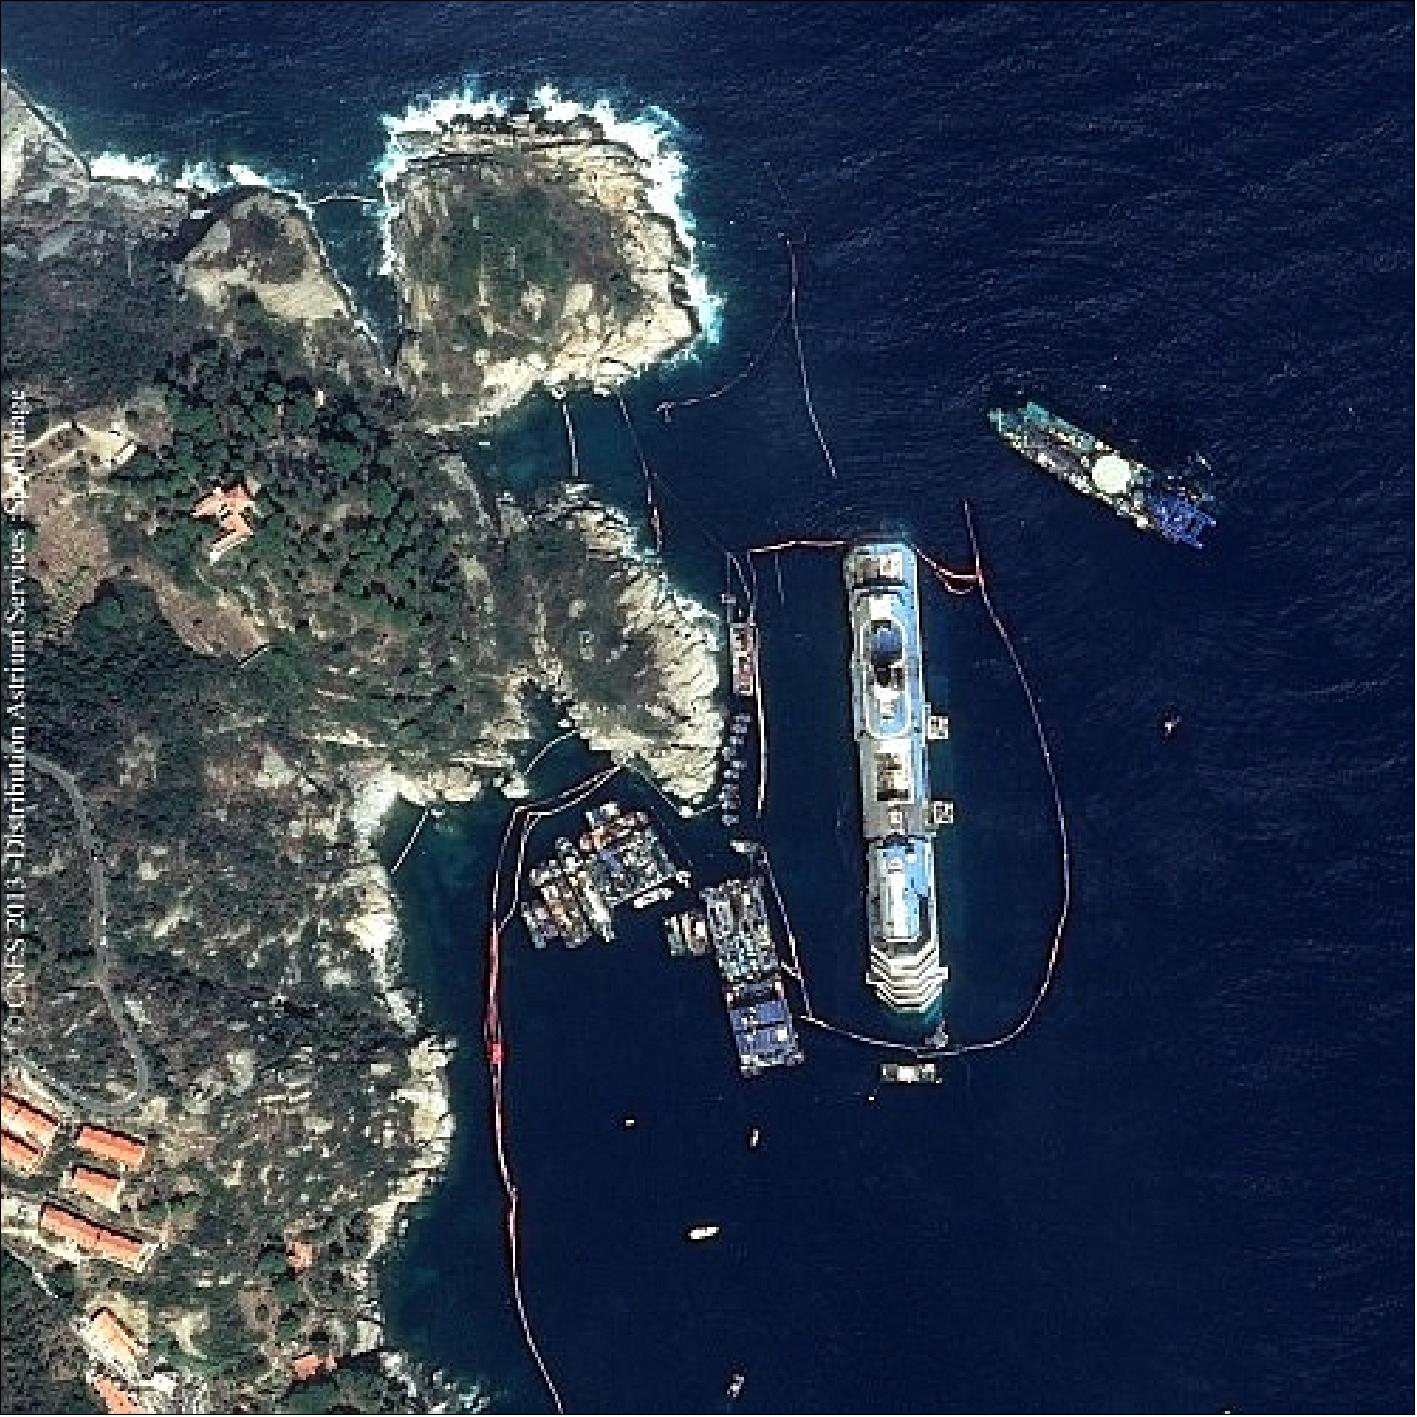 Figure 30: Re-floating operation of the Costa Concordia. This Pleiades-1A image was captured on September 17, 2013 (image credit: CNES Distribution Astrium/SPOT Image)